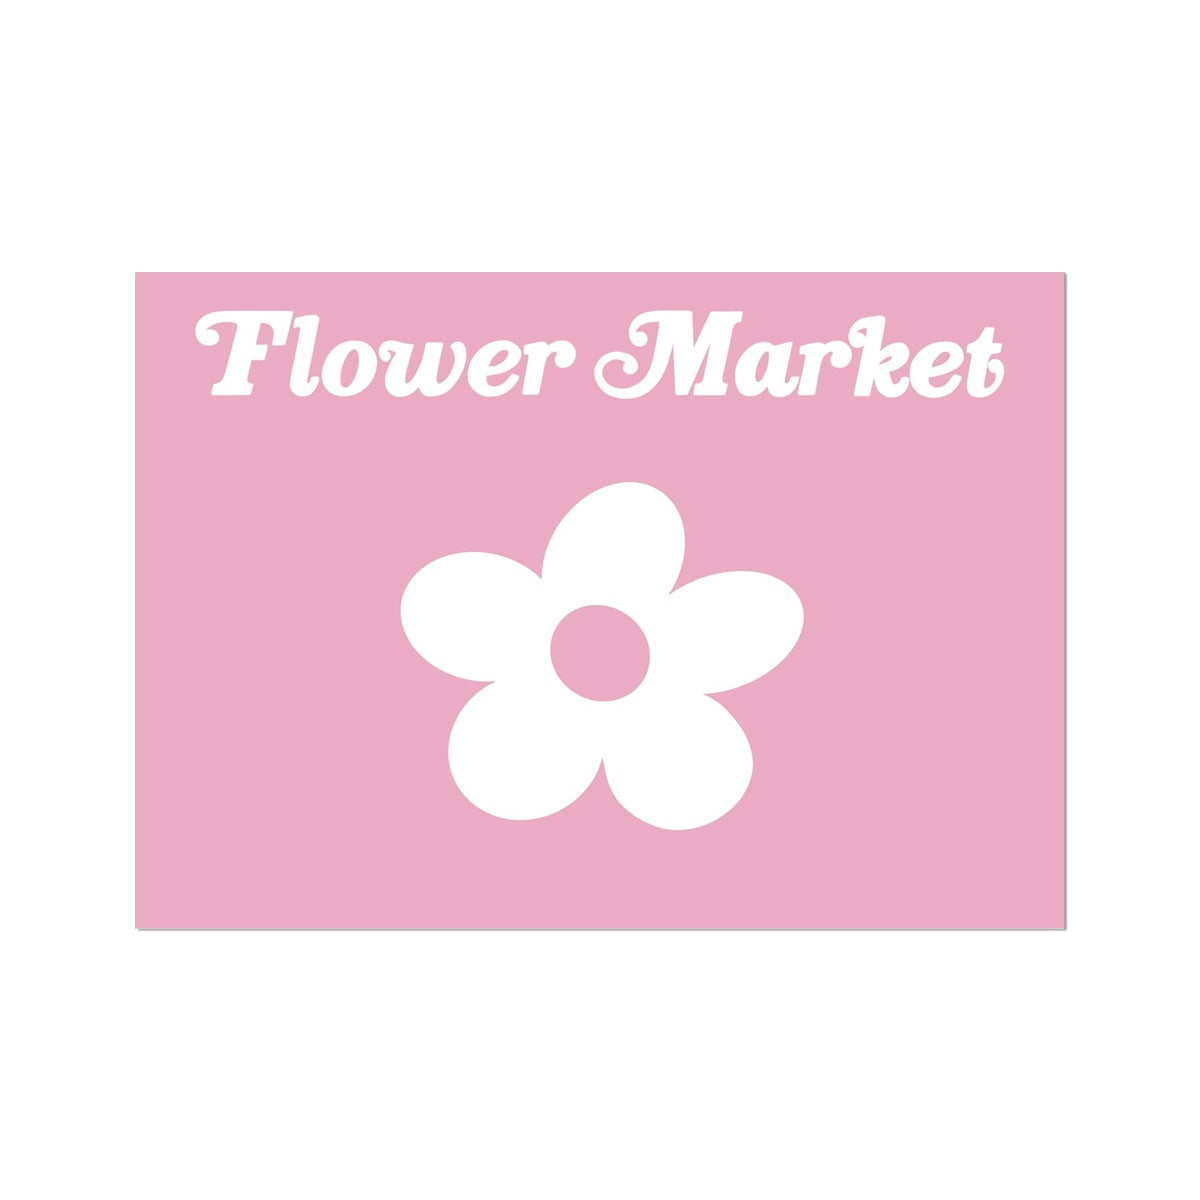 © les muses / Our Flower Market Sign collection features wall art with a retro daisy design under original hand drawn typography. A danish pastel style poster with a dreamy aesthetic and a vintage feel.

